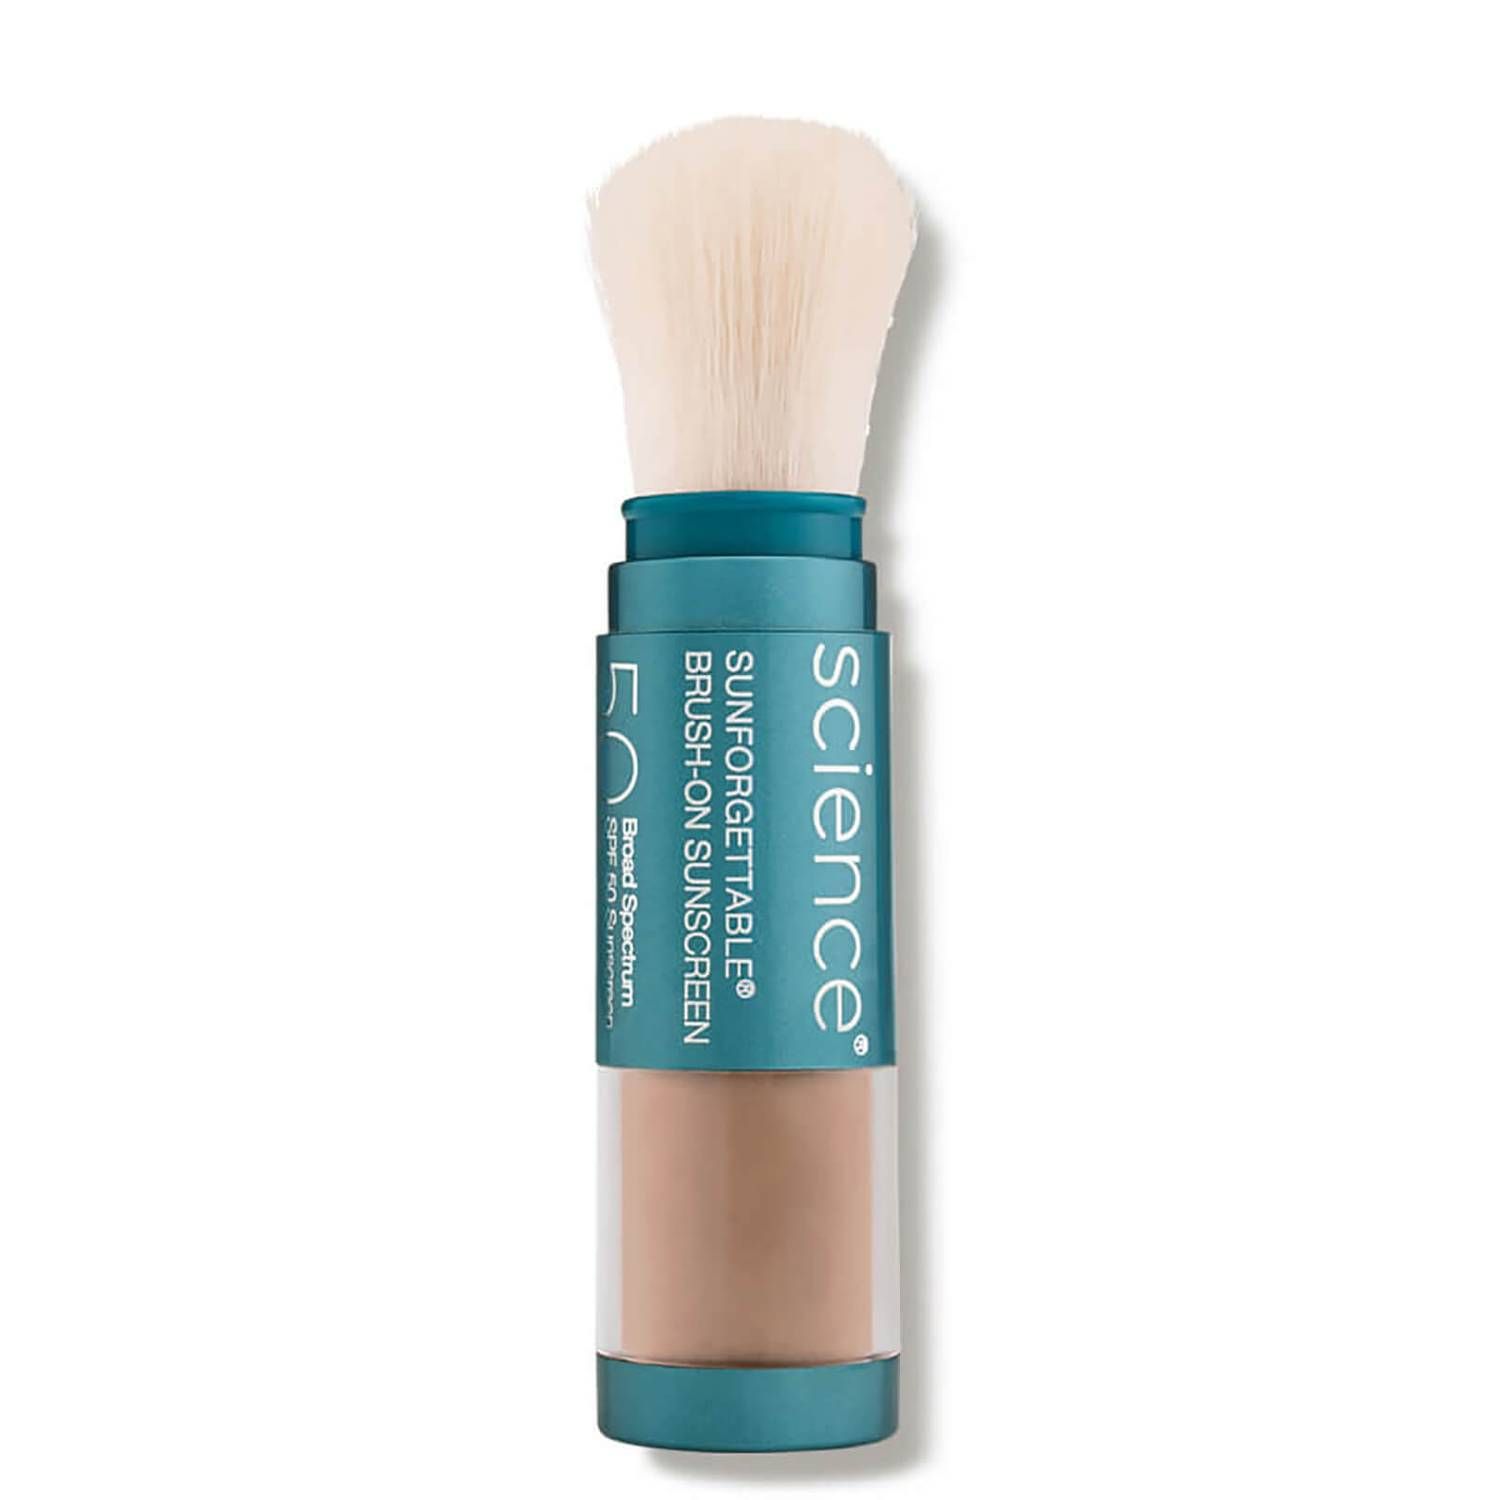 Colorescience Sunforgettable Total Protection Brush-On Shield SPF 50 6 g. | Skinstore